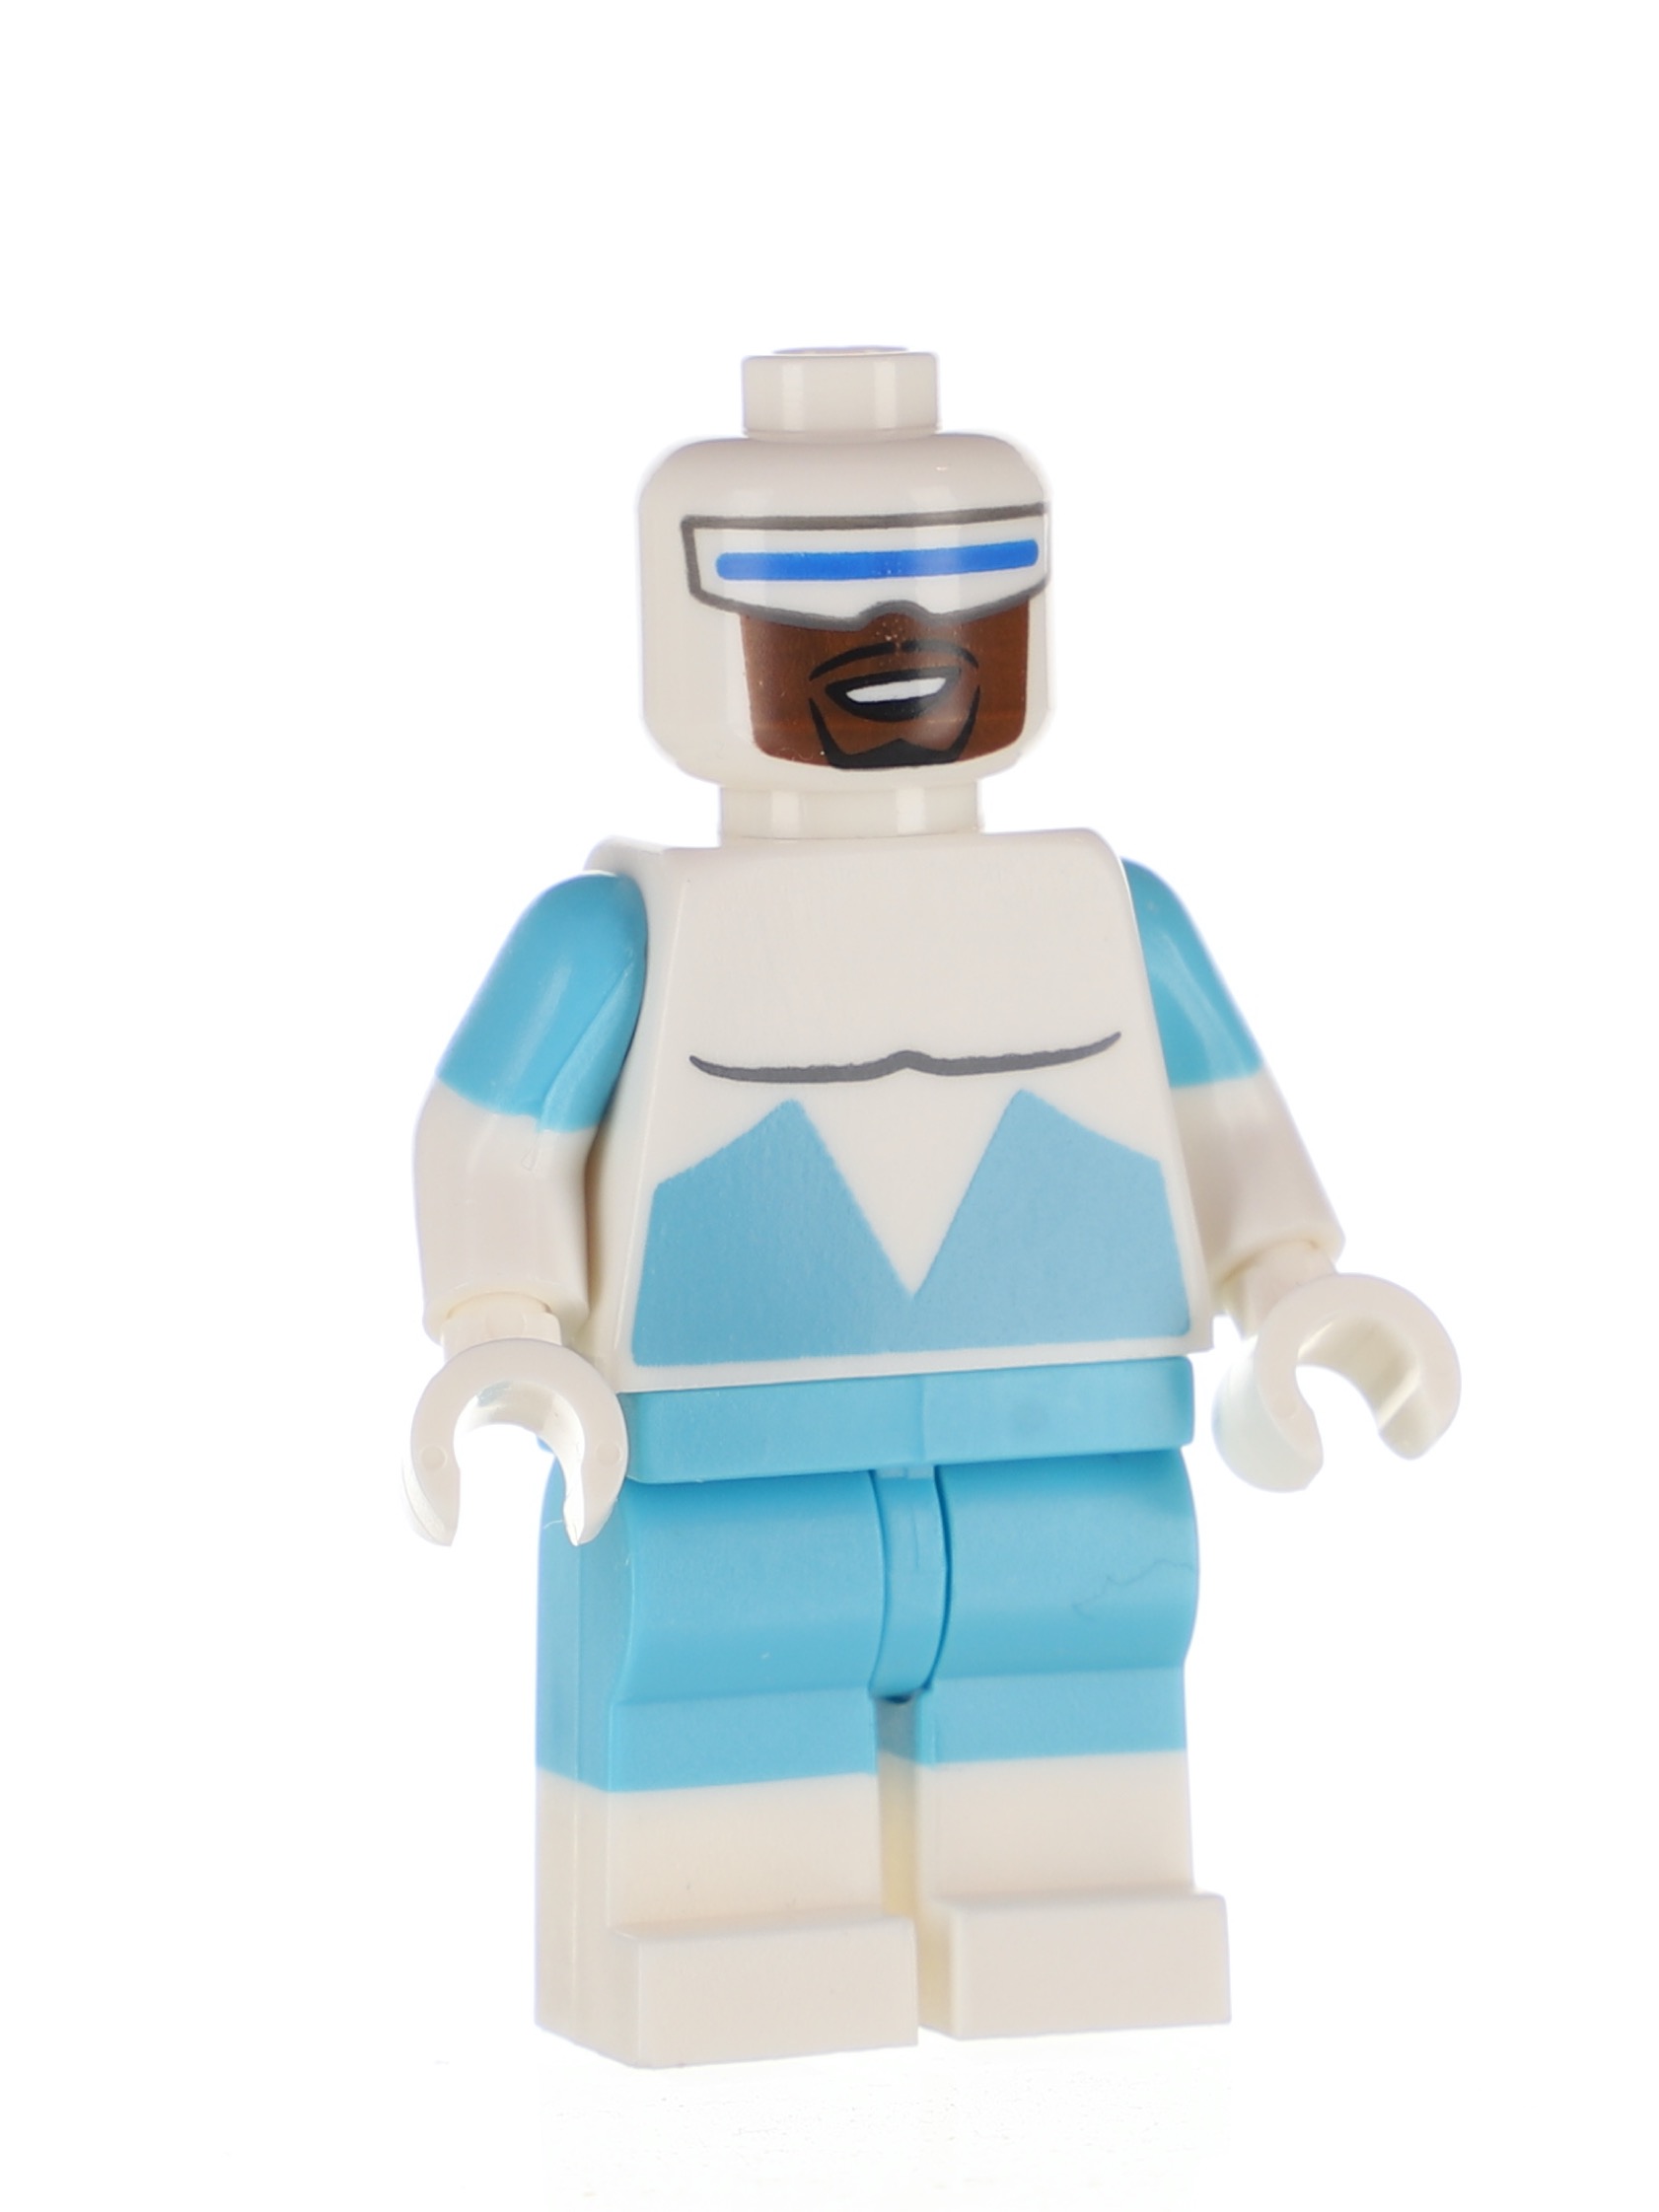 Dinsey The Incredible 2 Lego Frozone Lego minifigures dis041 year 2019 